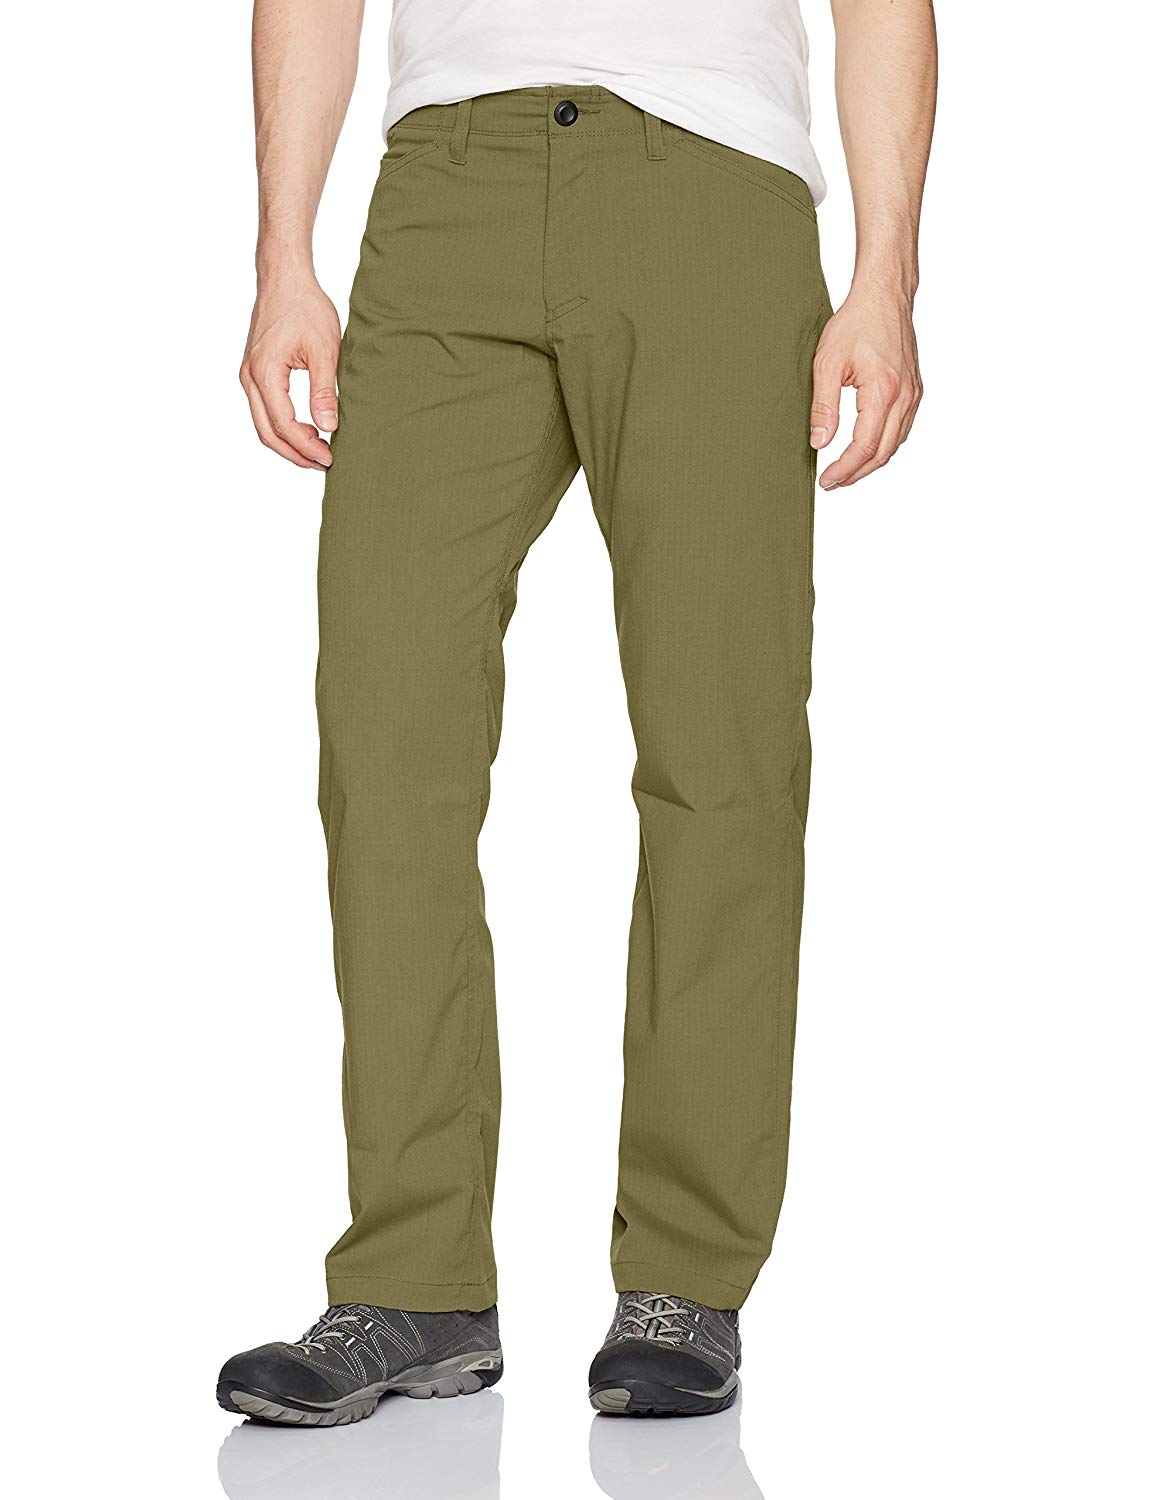 best hiking pants for men - Under Armour